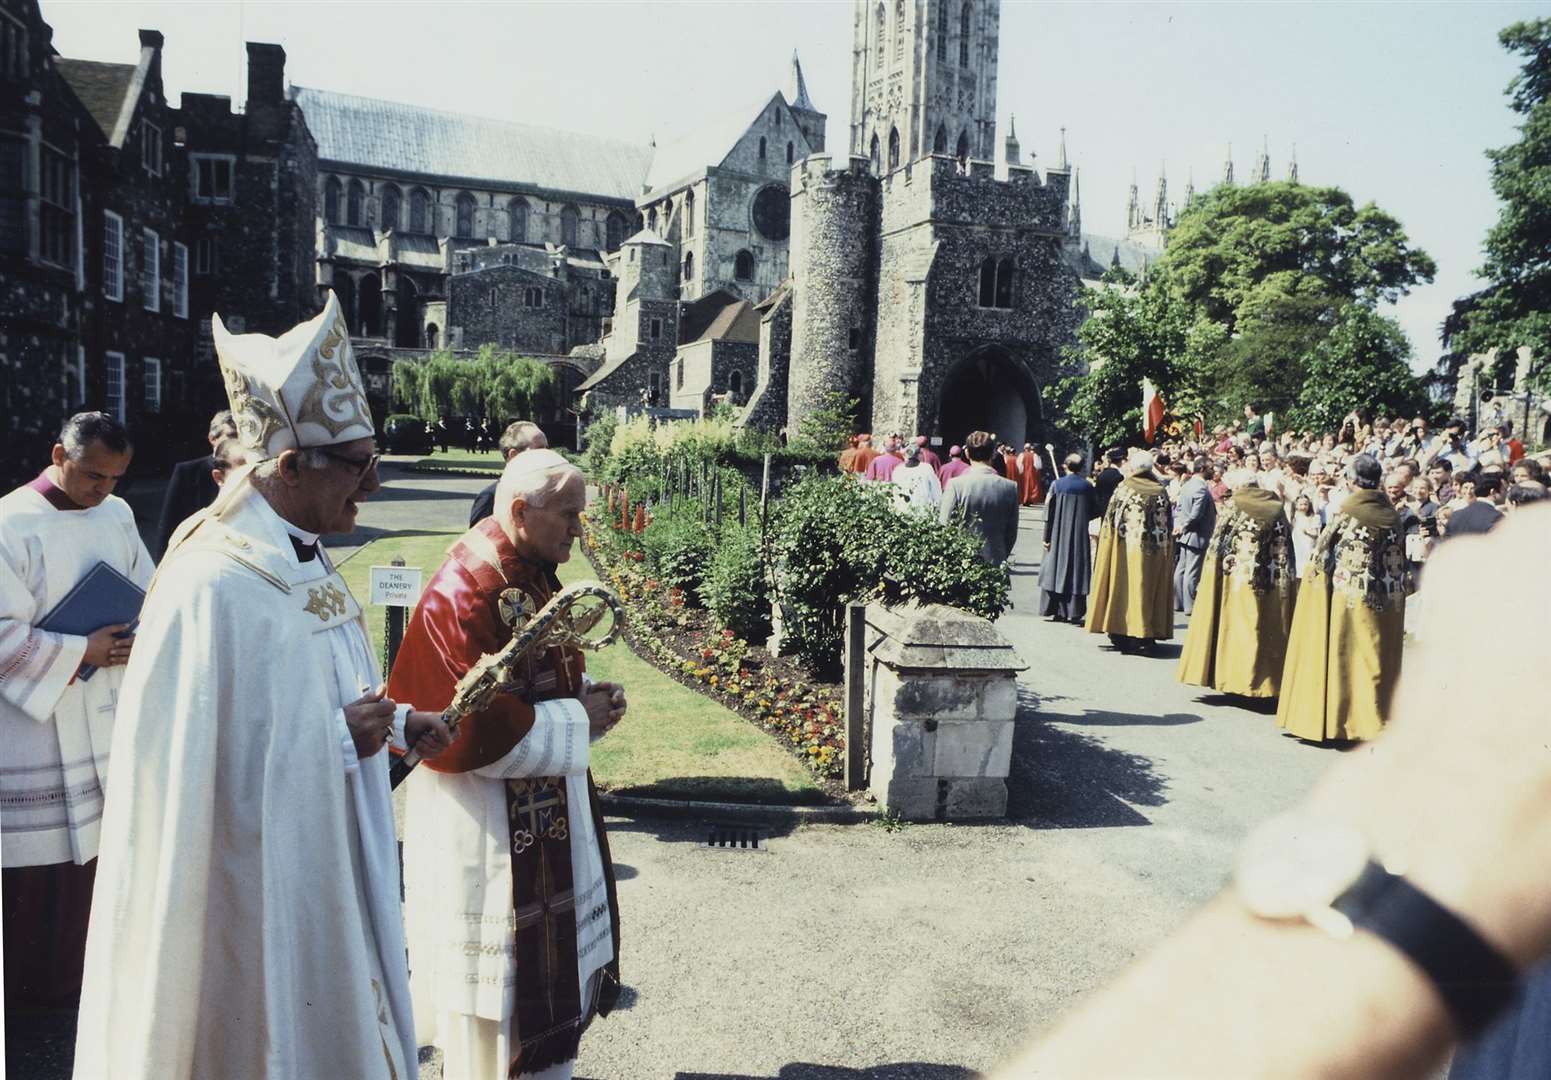 The Pope escorted by the then Archbishop of Canterbury, Dr Robert Runcie, on May 29, 1982